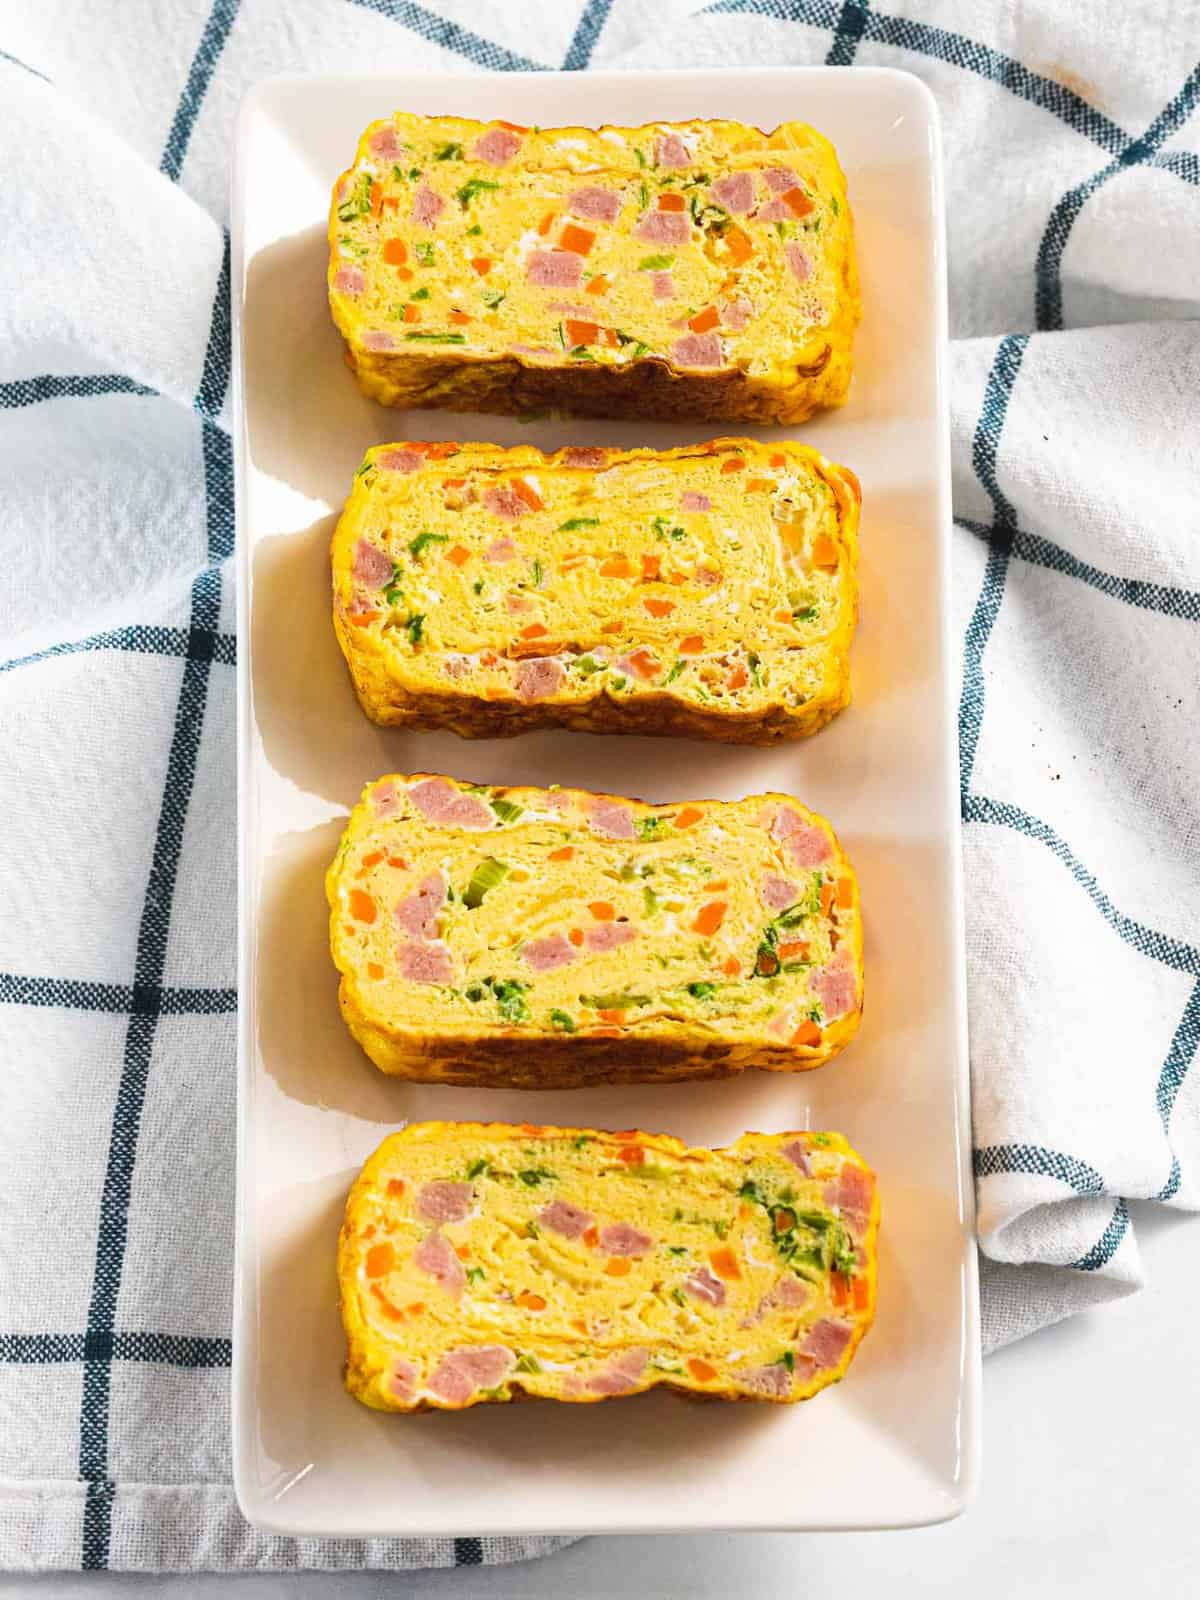 Korean rolled egg omelet or gyeran mari cut into pieces to show ham, carrots, and green onions.